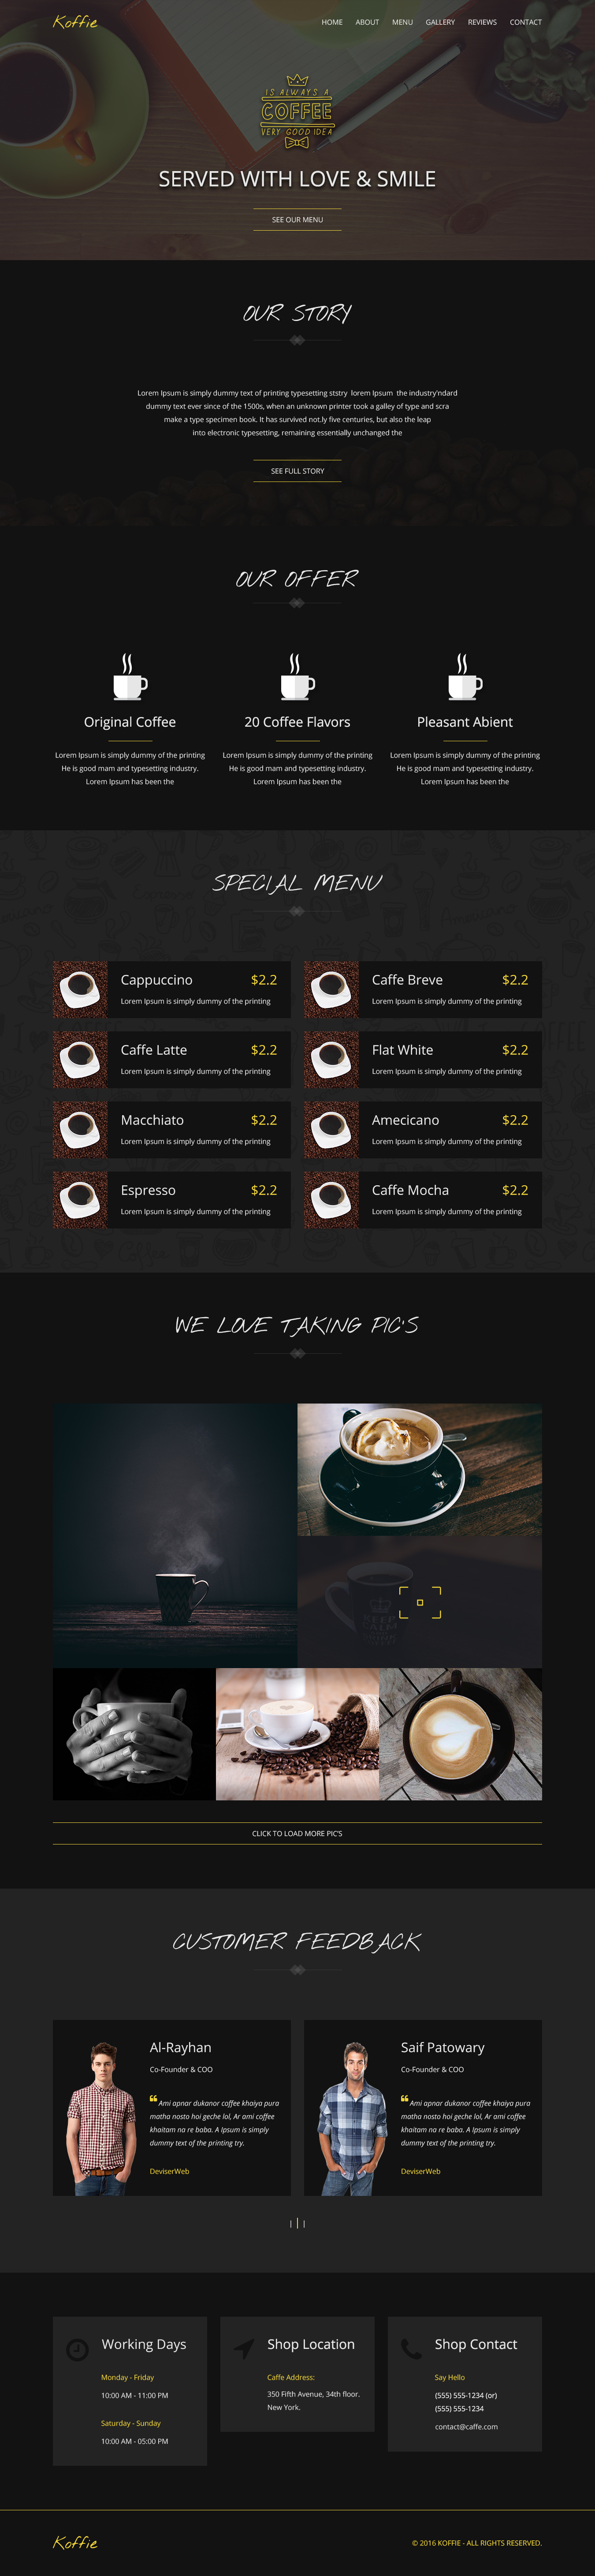 Koffie-Multi-purpose One Page PSD Template